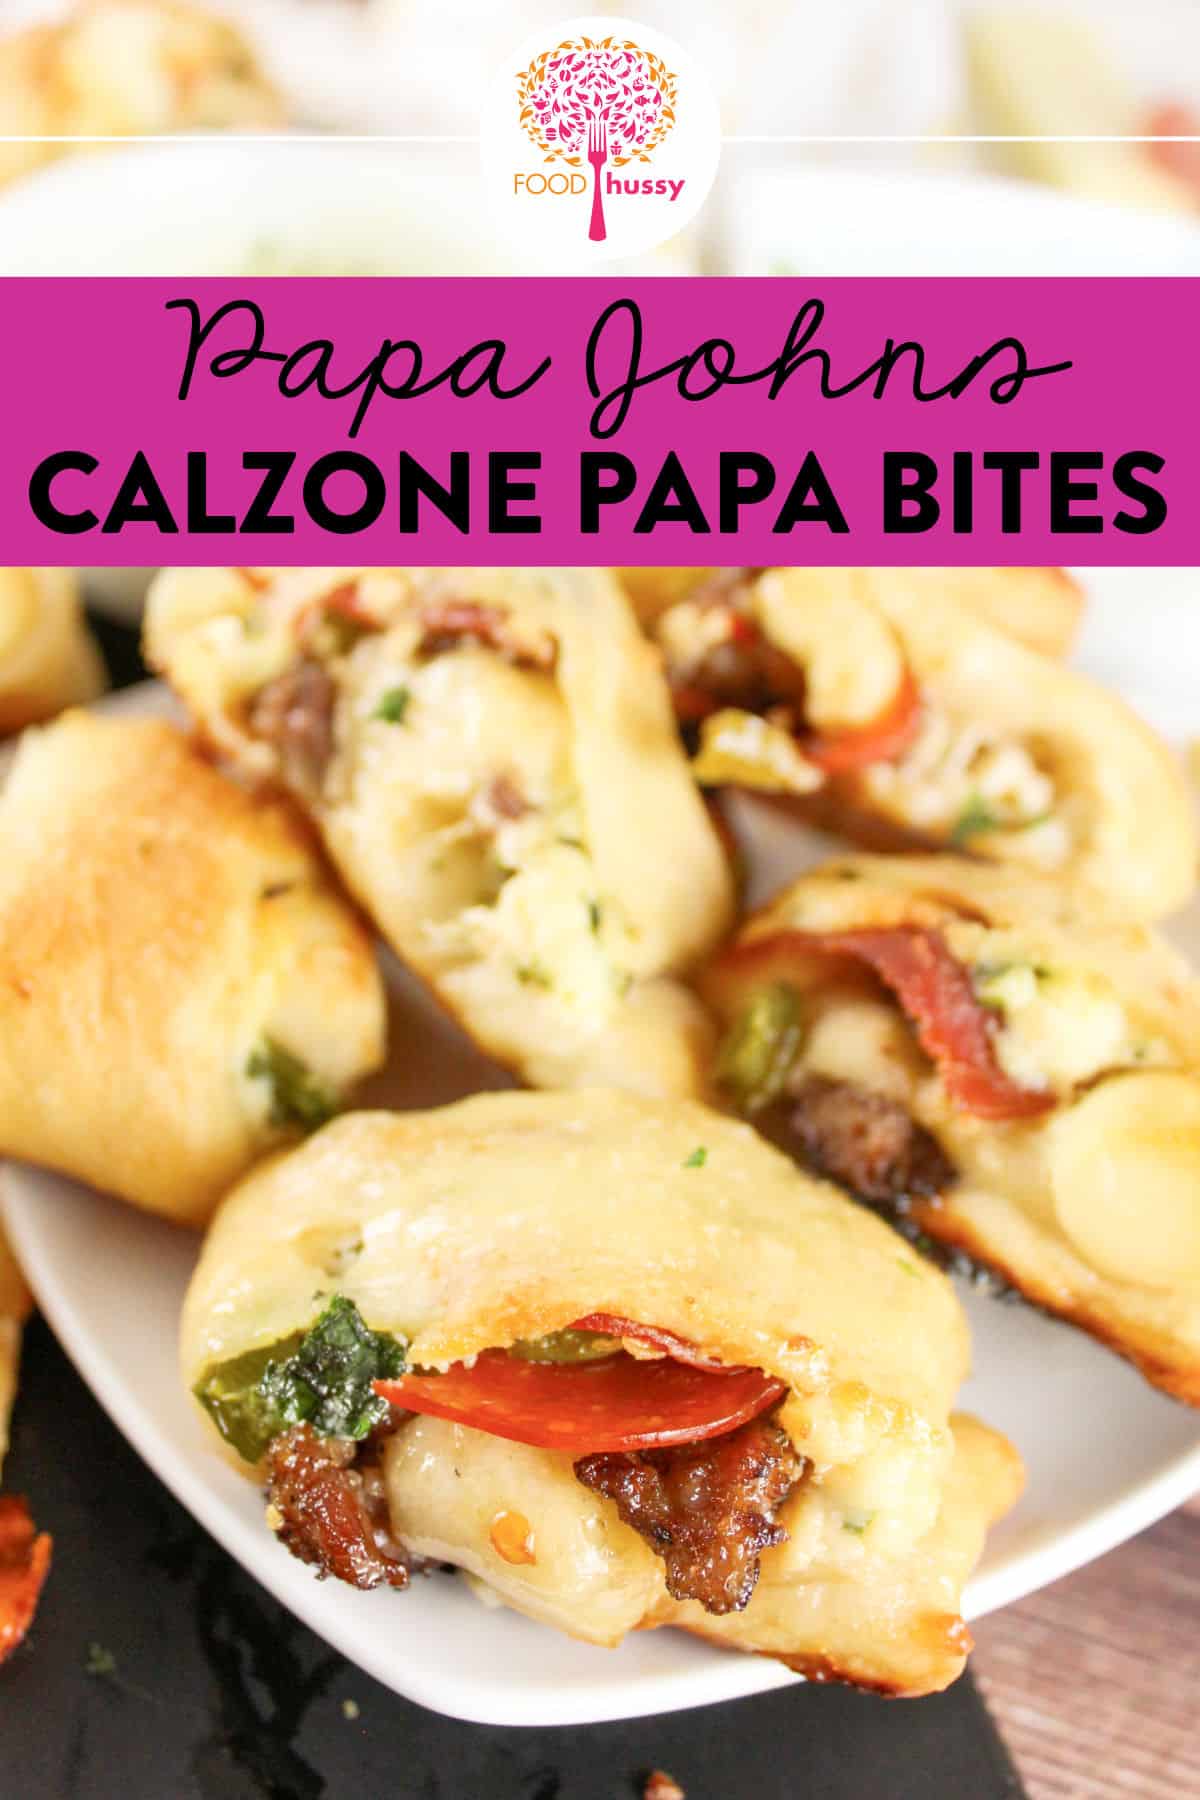 Papa John's is back at it again - this time with this menu item: New Calzone Papa Bites! Pizza crust stuffed full with crave-worthy flavors like mozzarella cheese, garlic herb ricotta, pepperoni, sausage and green pepper!  via @foodhussy